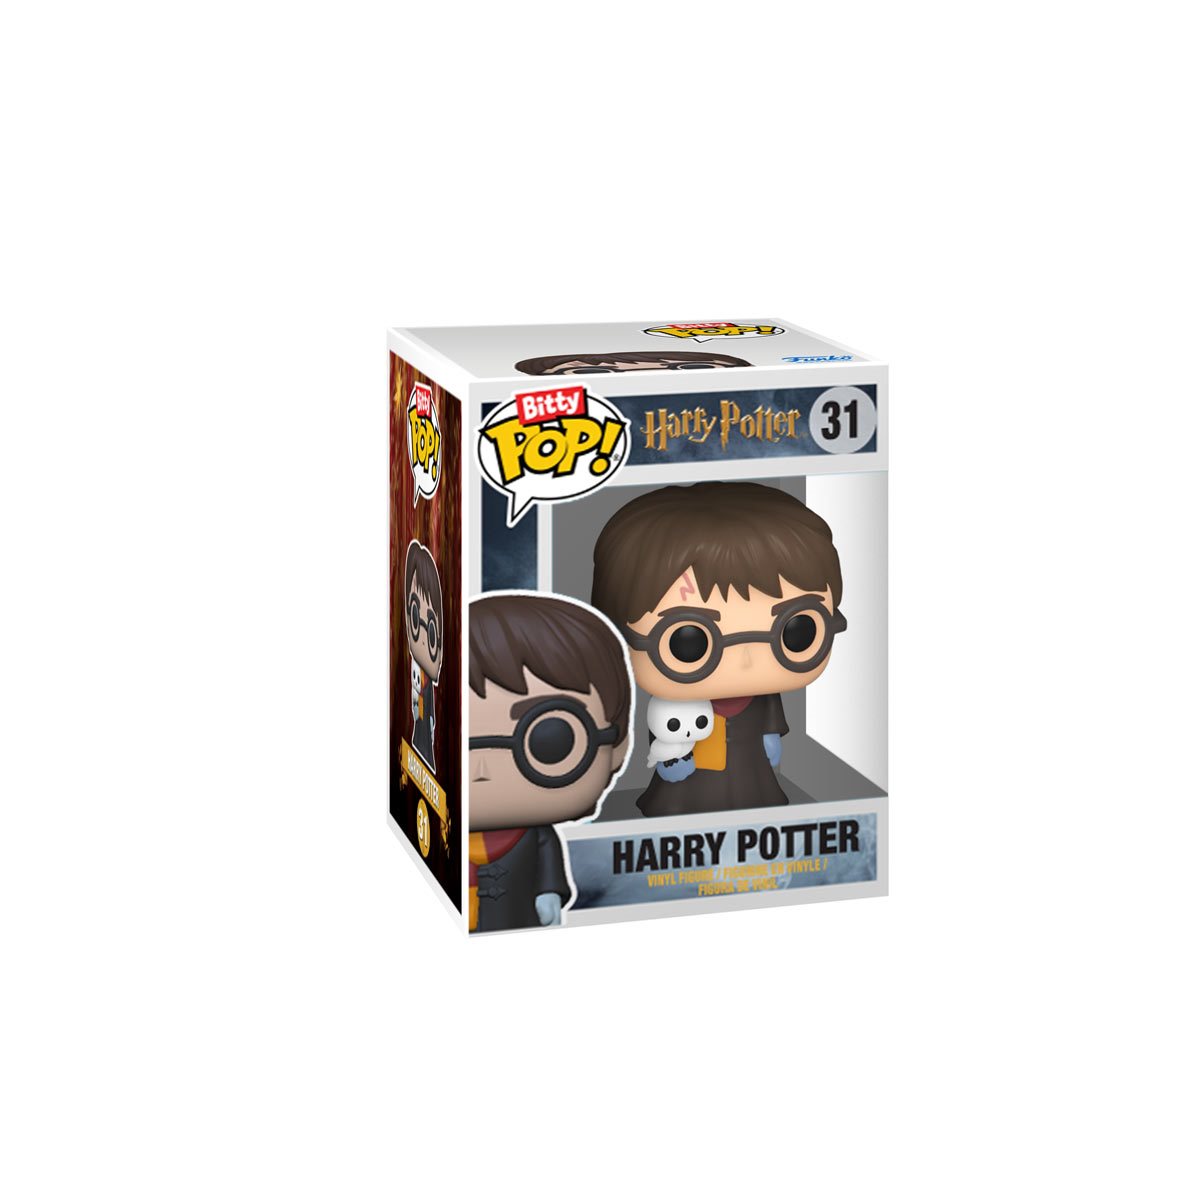 Bitty POP!'s of Disney and Harry Potter are coming to the Funko